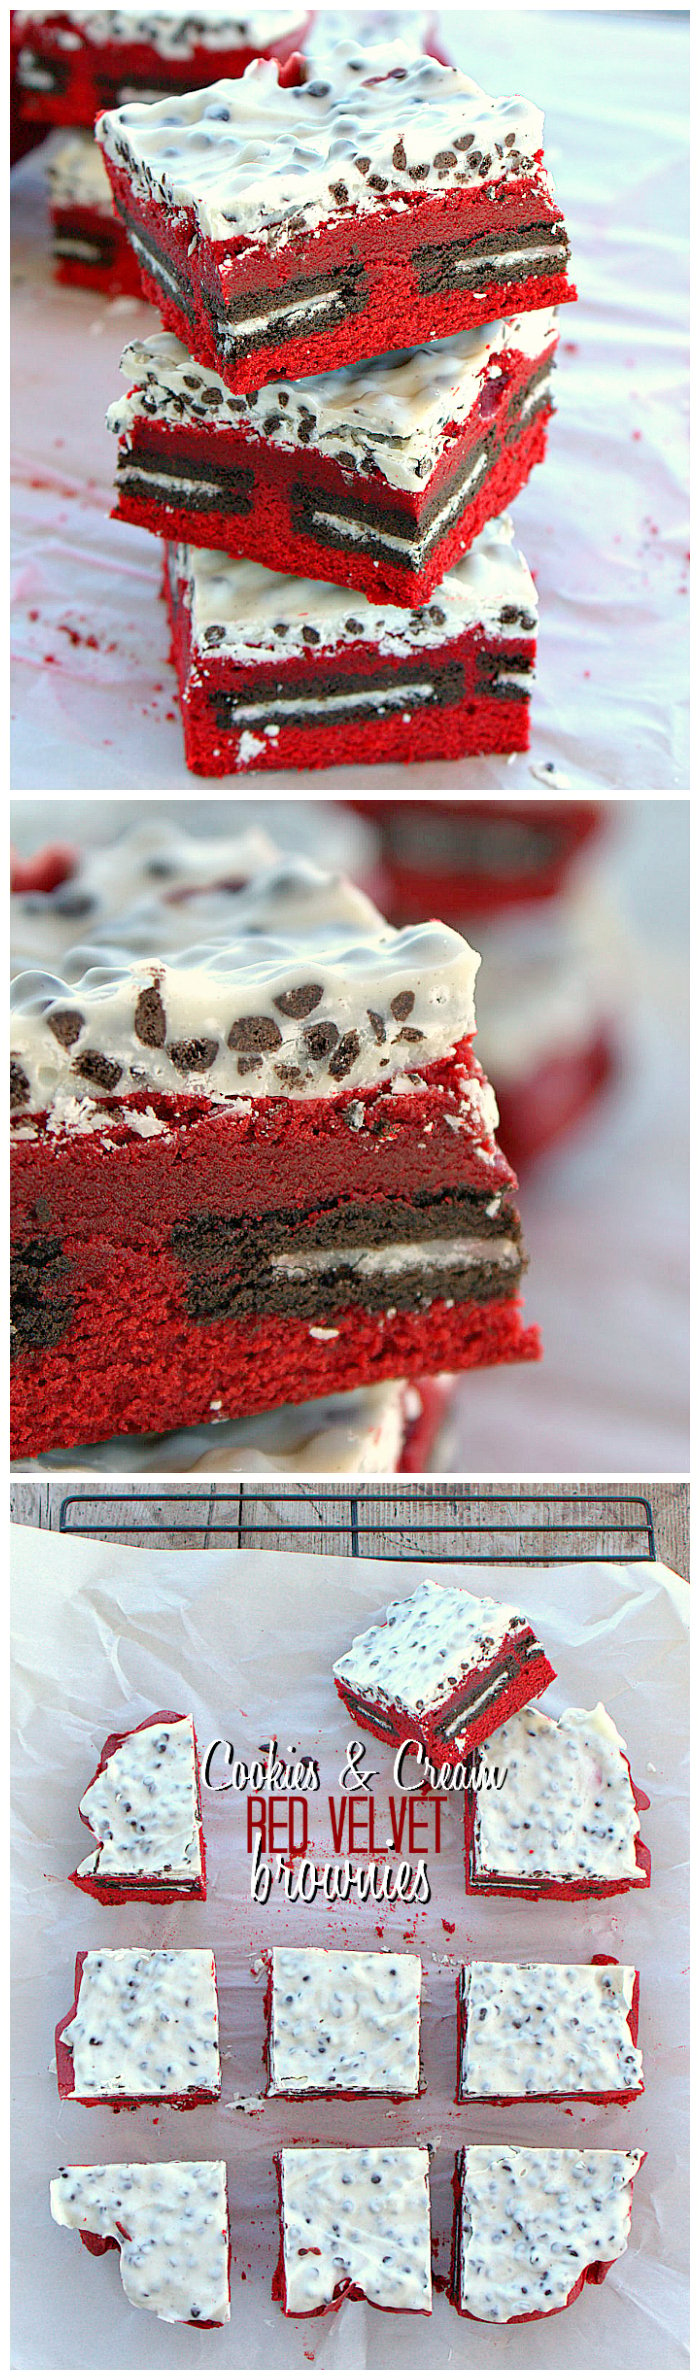 Cookies and Cream Red Velvet Brownies long collage of images